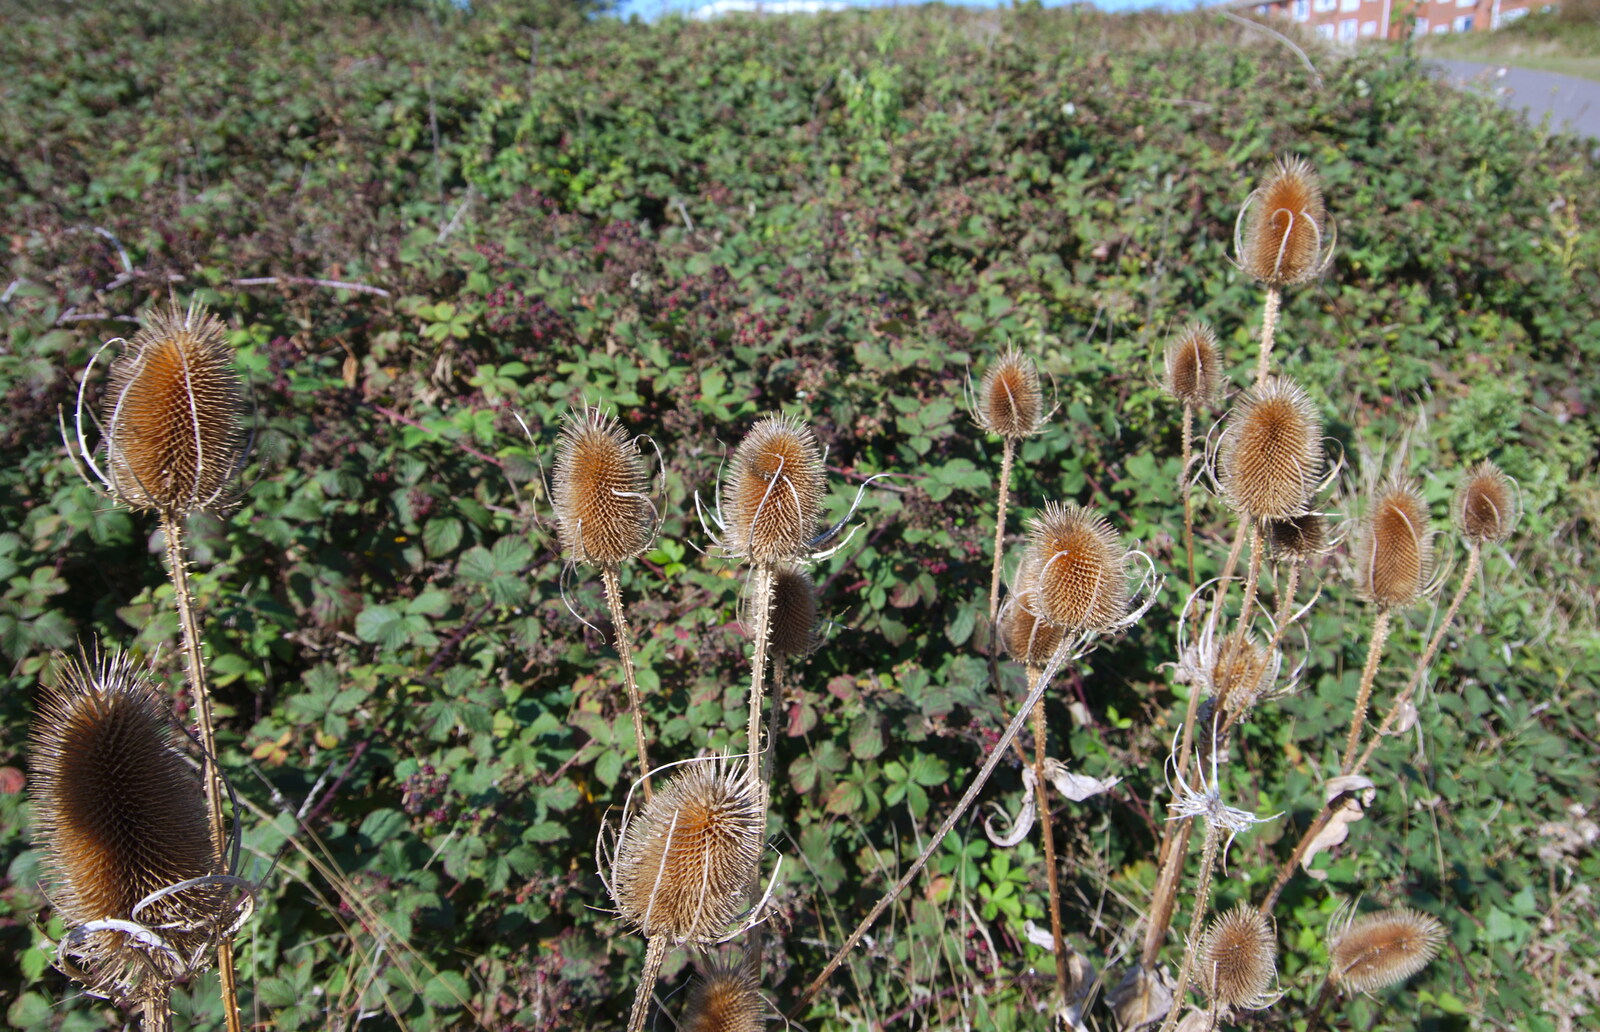 Spiky seed heads on the cliff top from A Trip to the South Coast, Highcliffe, Dorset - 20th September 2019